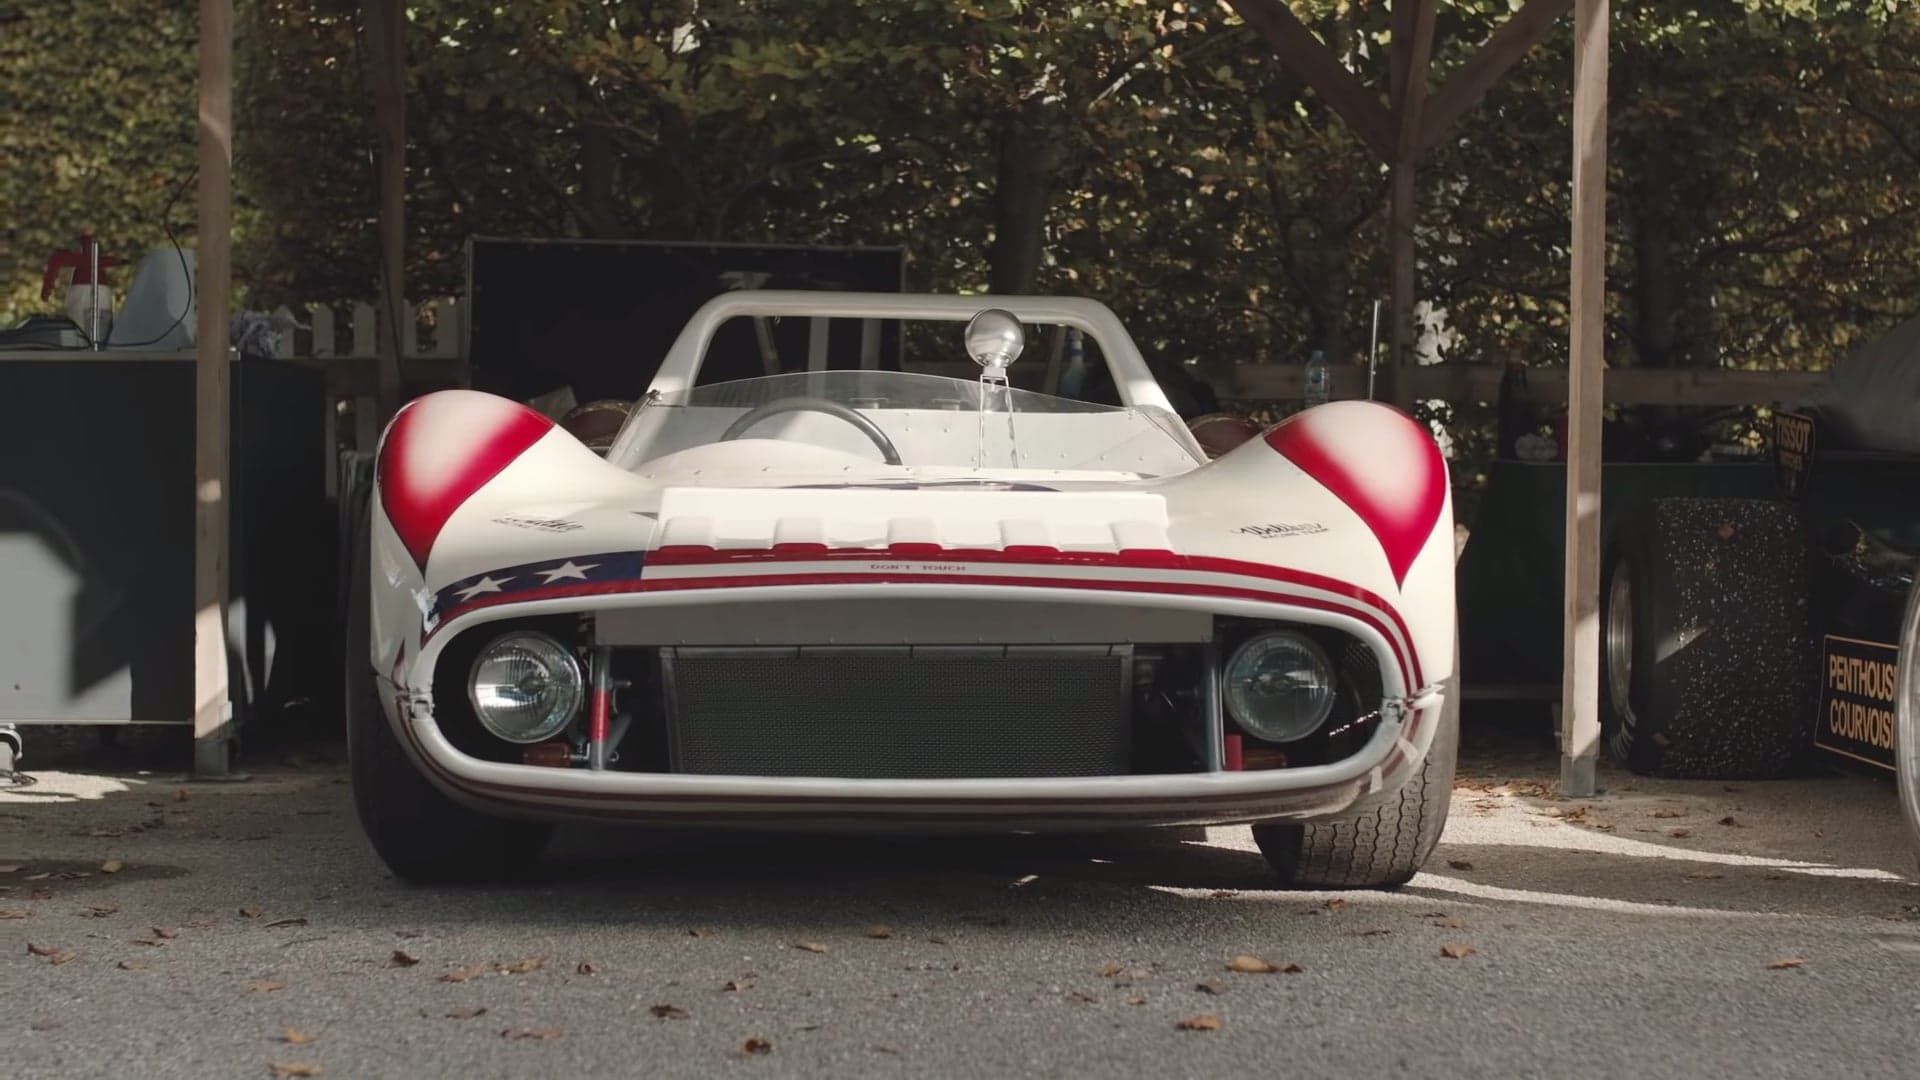 This One-Off, Chevy-Powered Race Car Was More Show Than Go, But Now It Beats Lolas at Goodwood